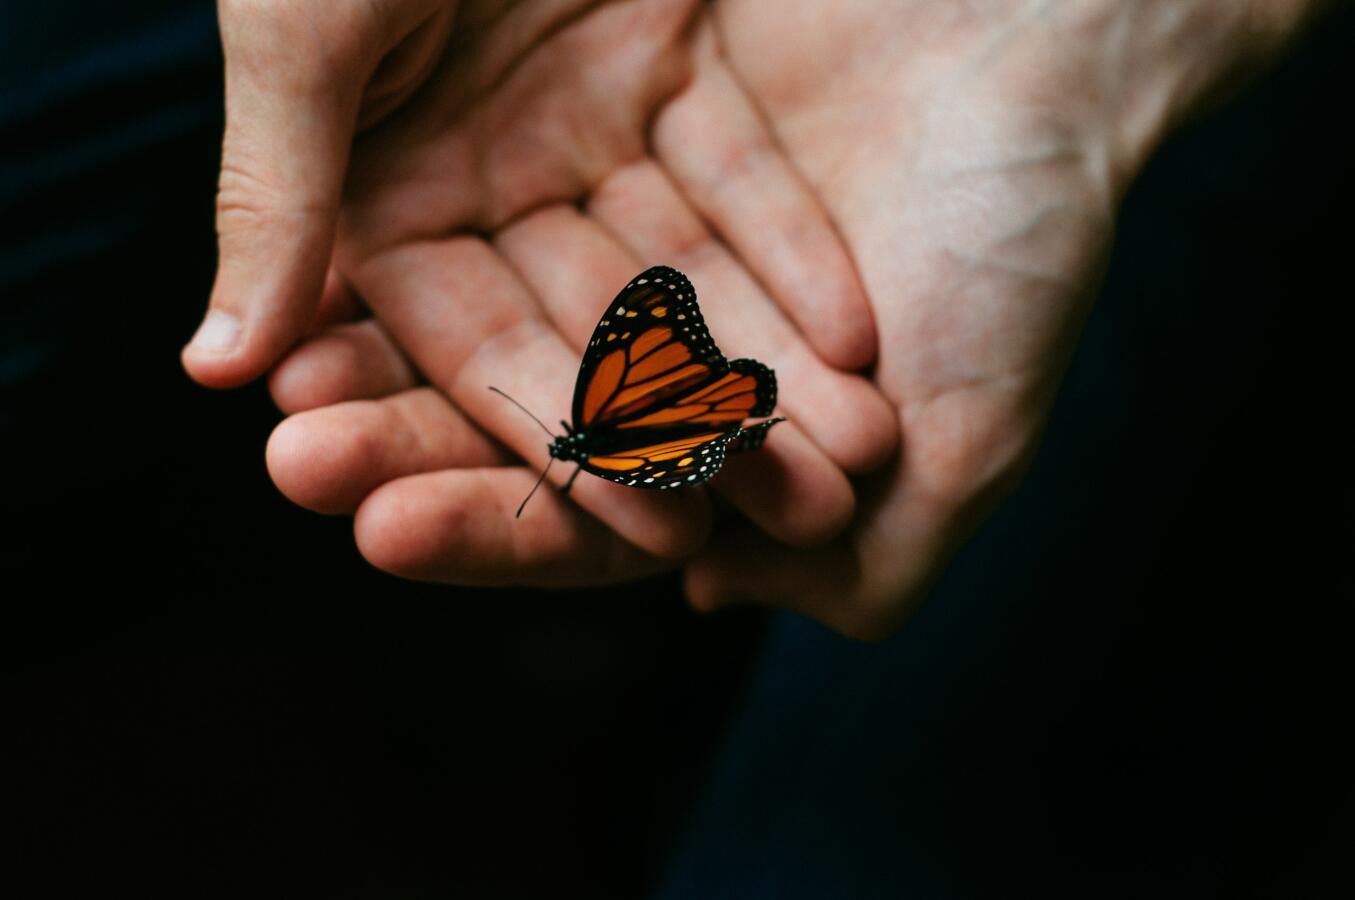 photo of a butterfly resting in someone's hands